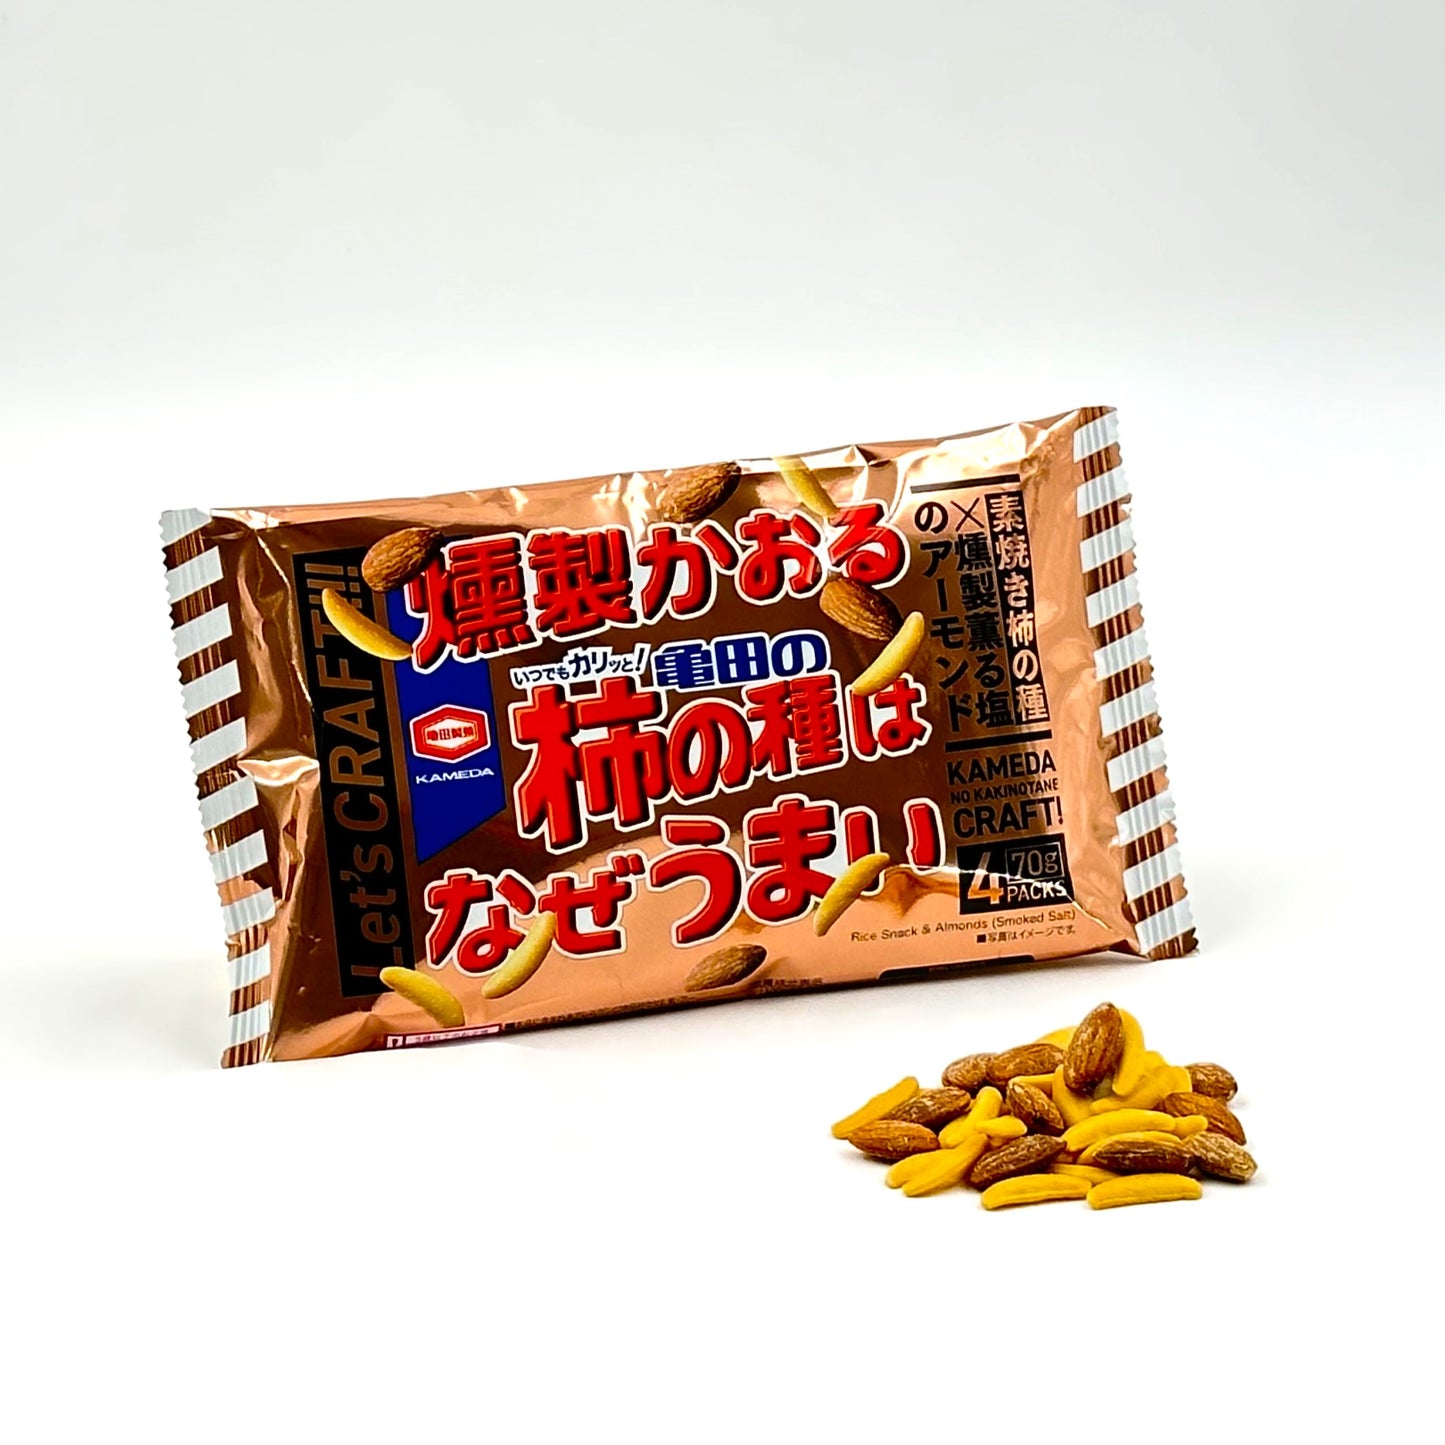 Kaki no Tane 6package Box【Limited product in Japan】